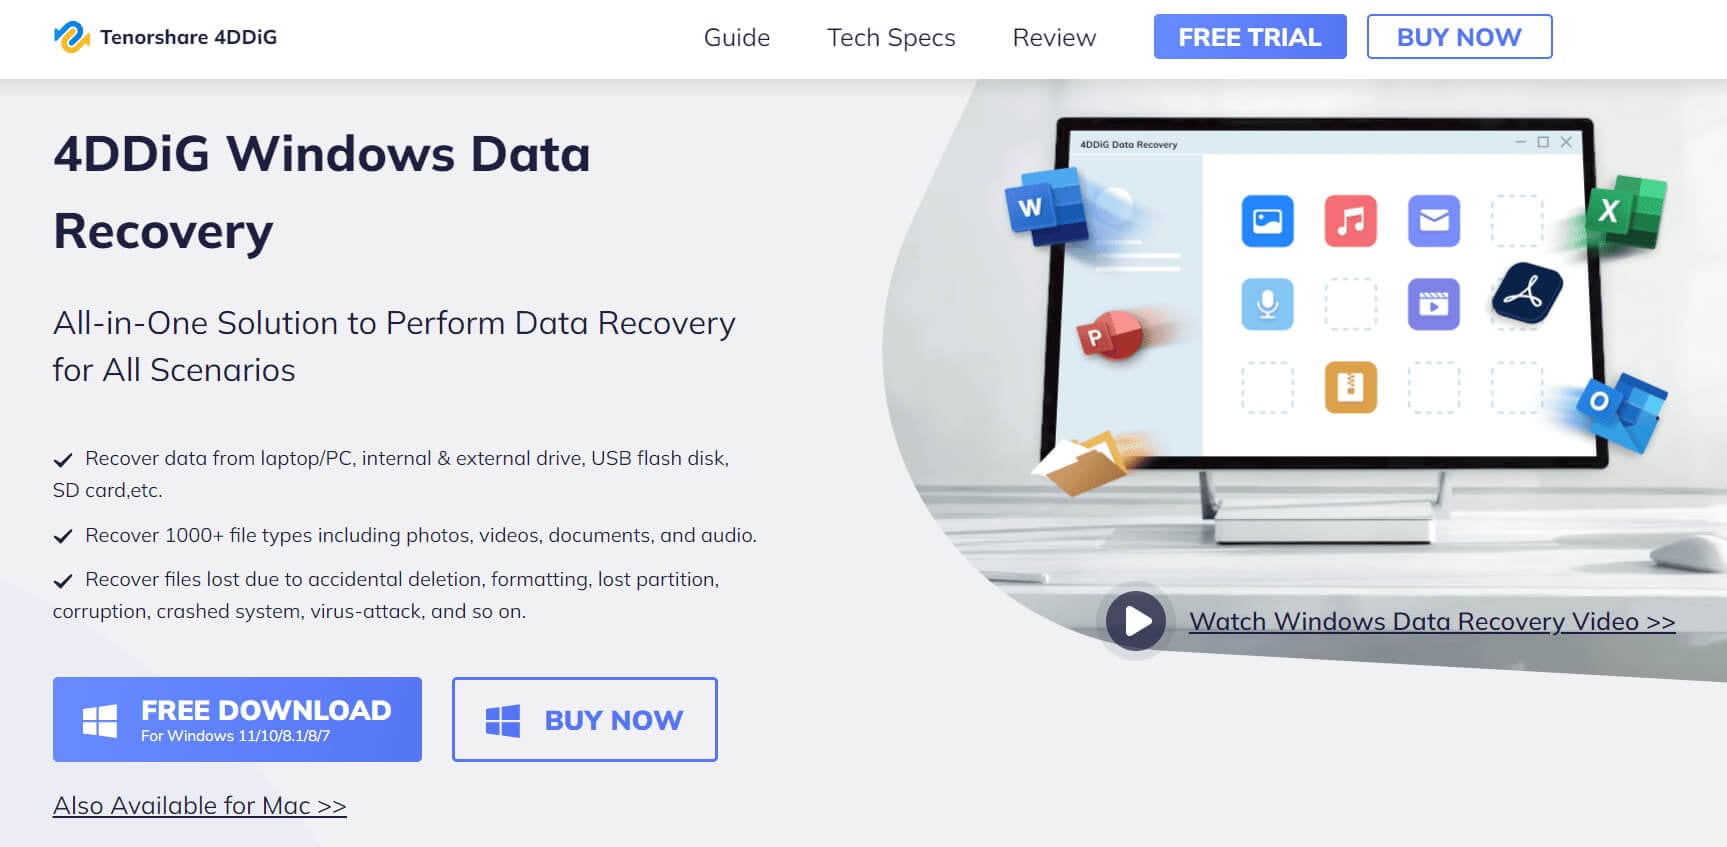 tenorshare 4ddig data recovery review